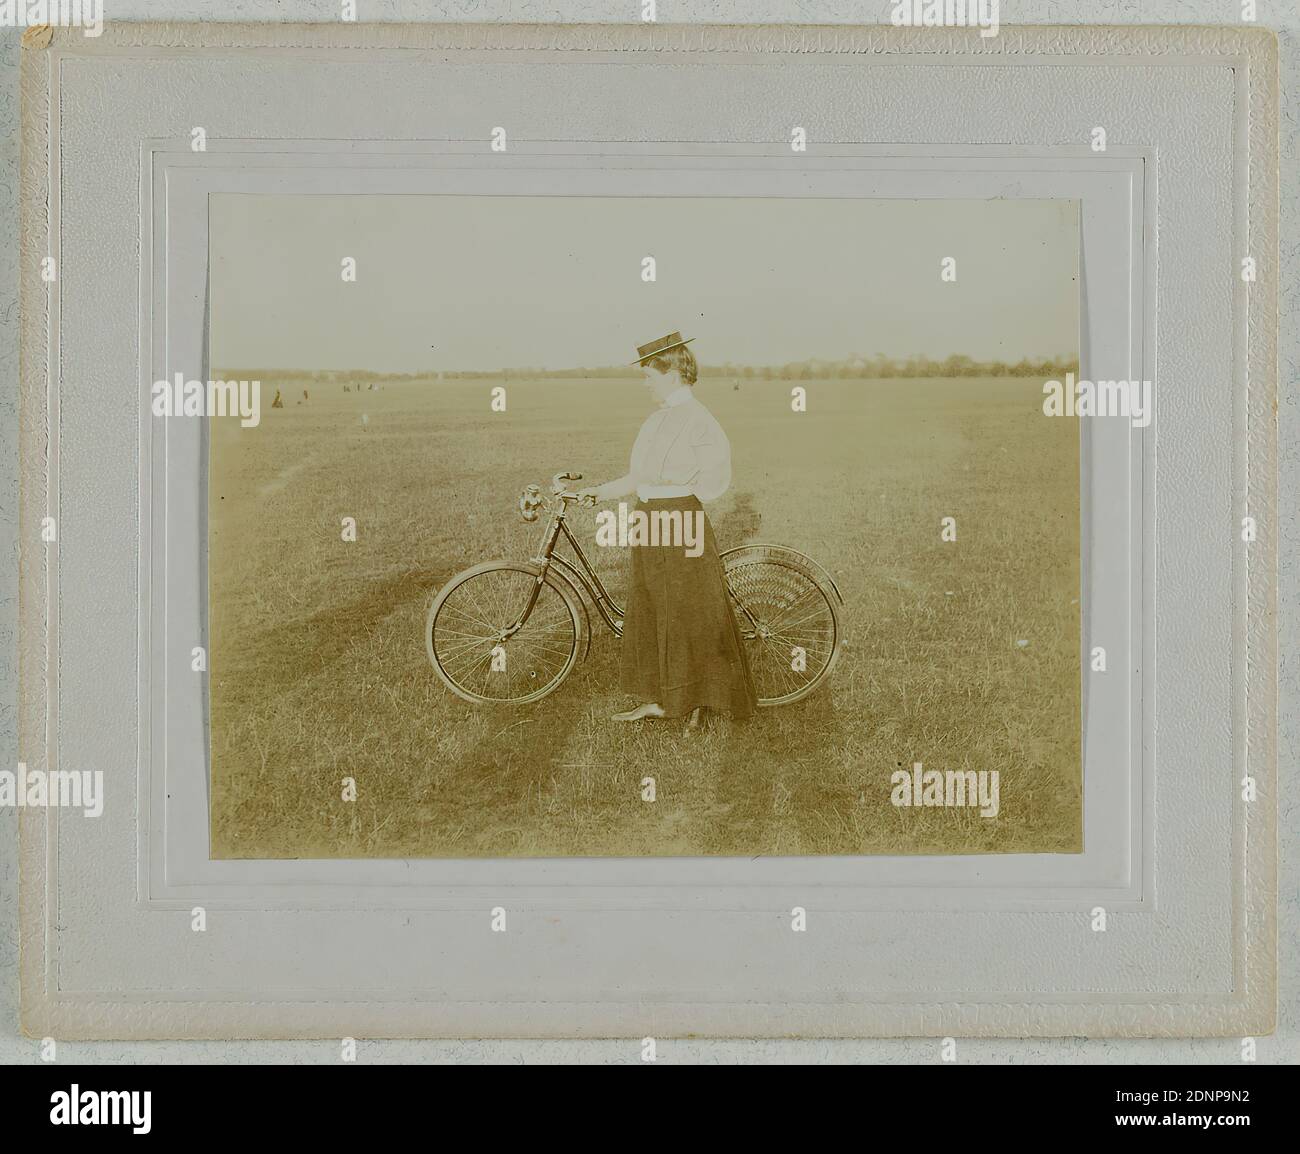 Heinrich Hamann, Atelier J. Hamann, Johann Hinrich W. Hamann, cyclist, the winner - Radfahr-Klub Hammonia, silver gelatin paper, black and white positive process, picture size: height: 8,30 cm; width: 10,90 cm, title: verso on the cardboard: handwritten in lead: Hamburg 1903, cyclist, the winner - Radfahr-Klub Hammonia, J. Hamann, Hamburg 36, Valentinskamp, 41, studio for photography of all kinds, Awarded Hamburg 1899; all film and reproduction rights reserved, reporting photography, sports photography, woman, bicycle, two-wheeler, hat, sports competition, sports tournament, shadow Stock Photo